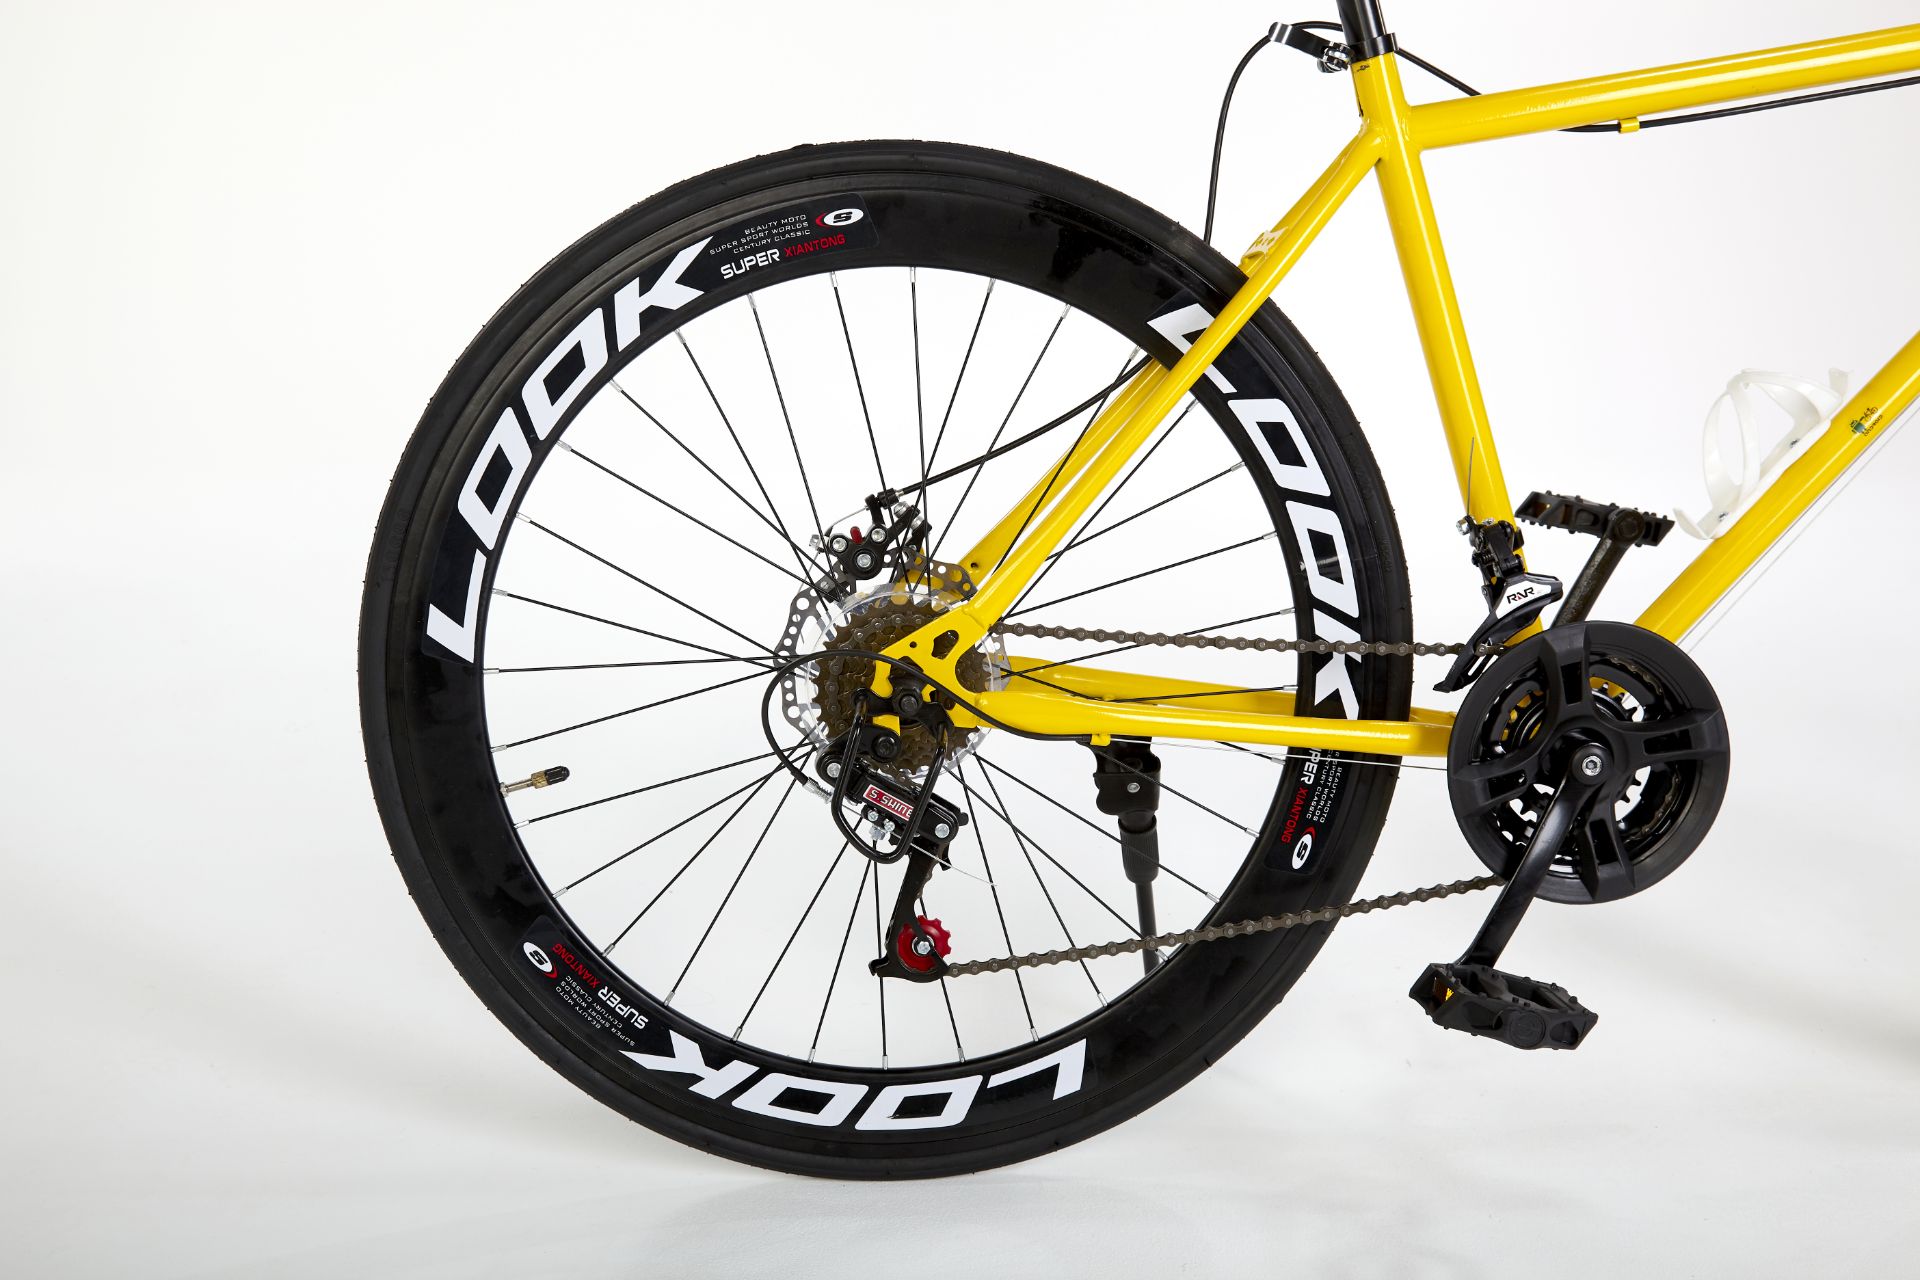 YELLOW STREET BIKE WITH 21 GREAR, BRAKE DISKS, KICK STAND, COOL THIN TYRES - Image 3 of 10